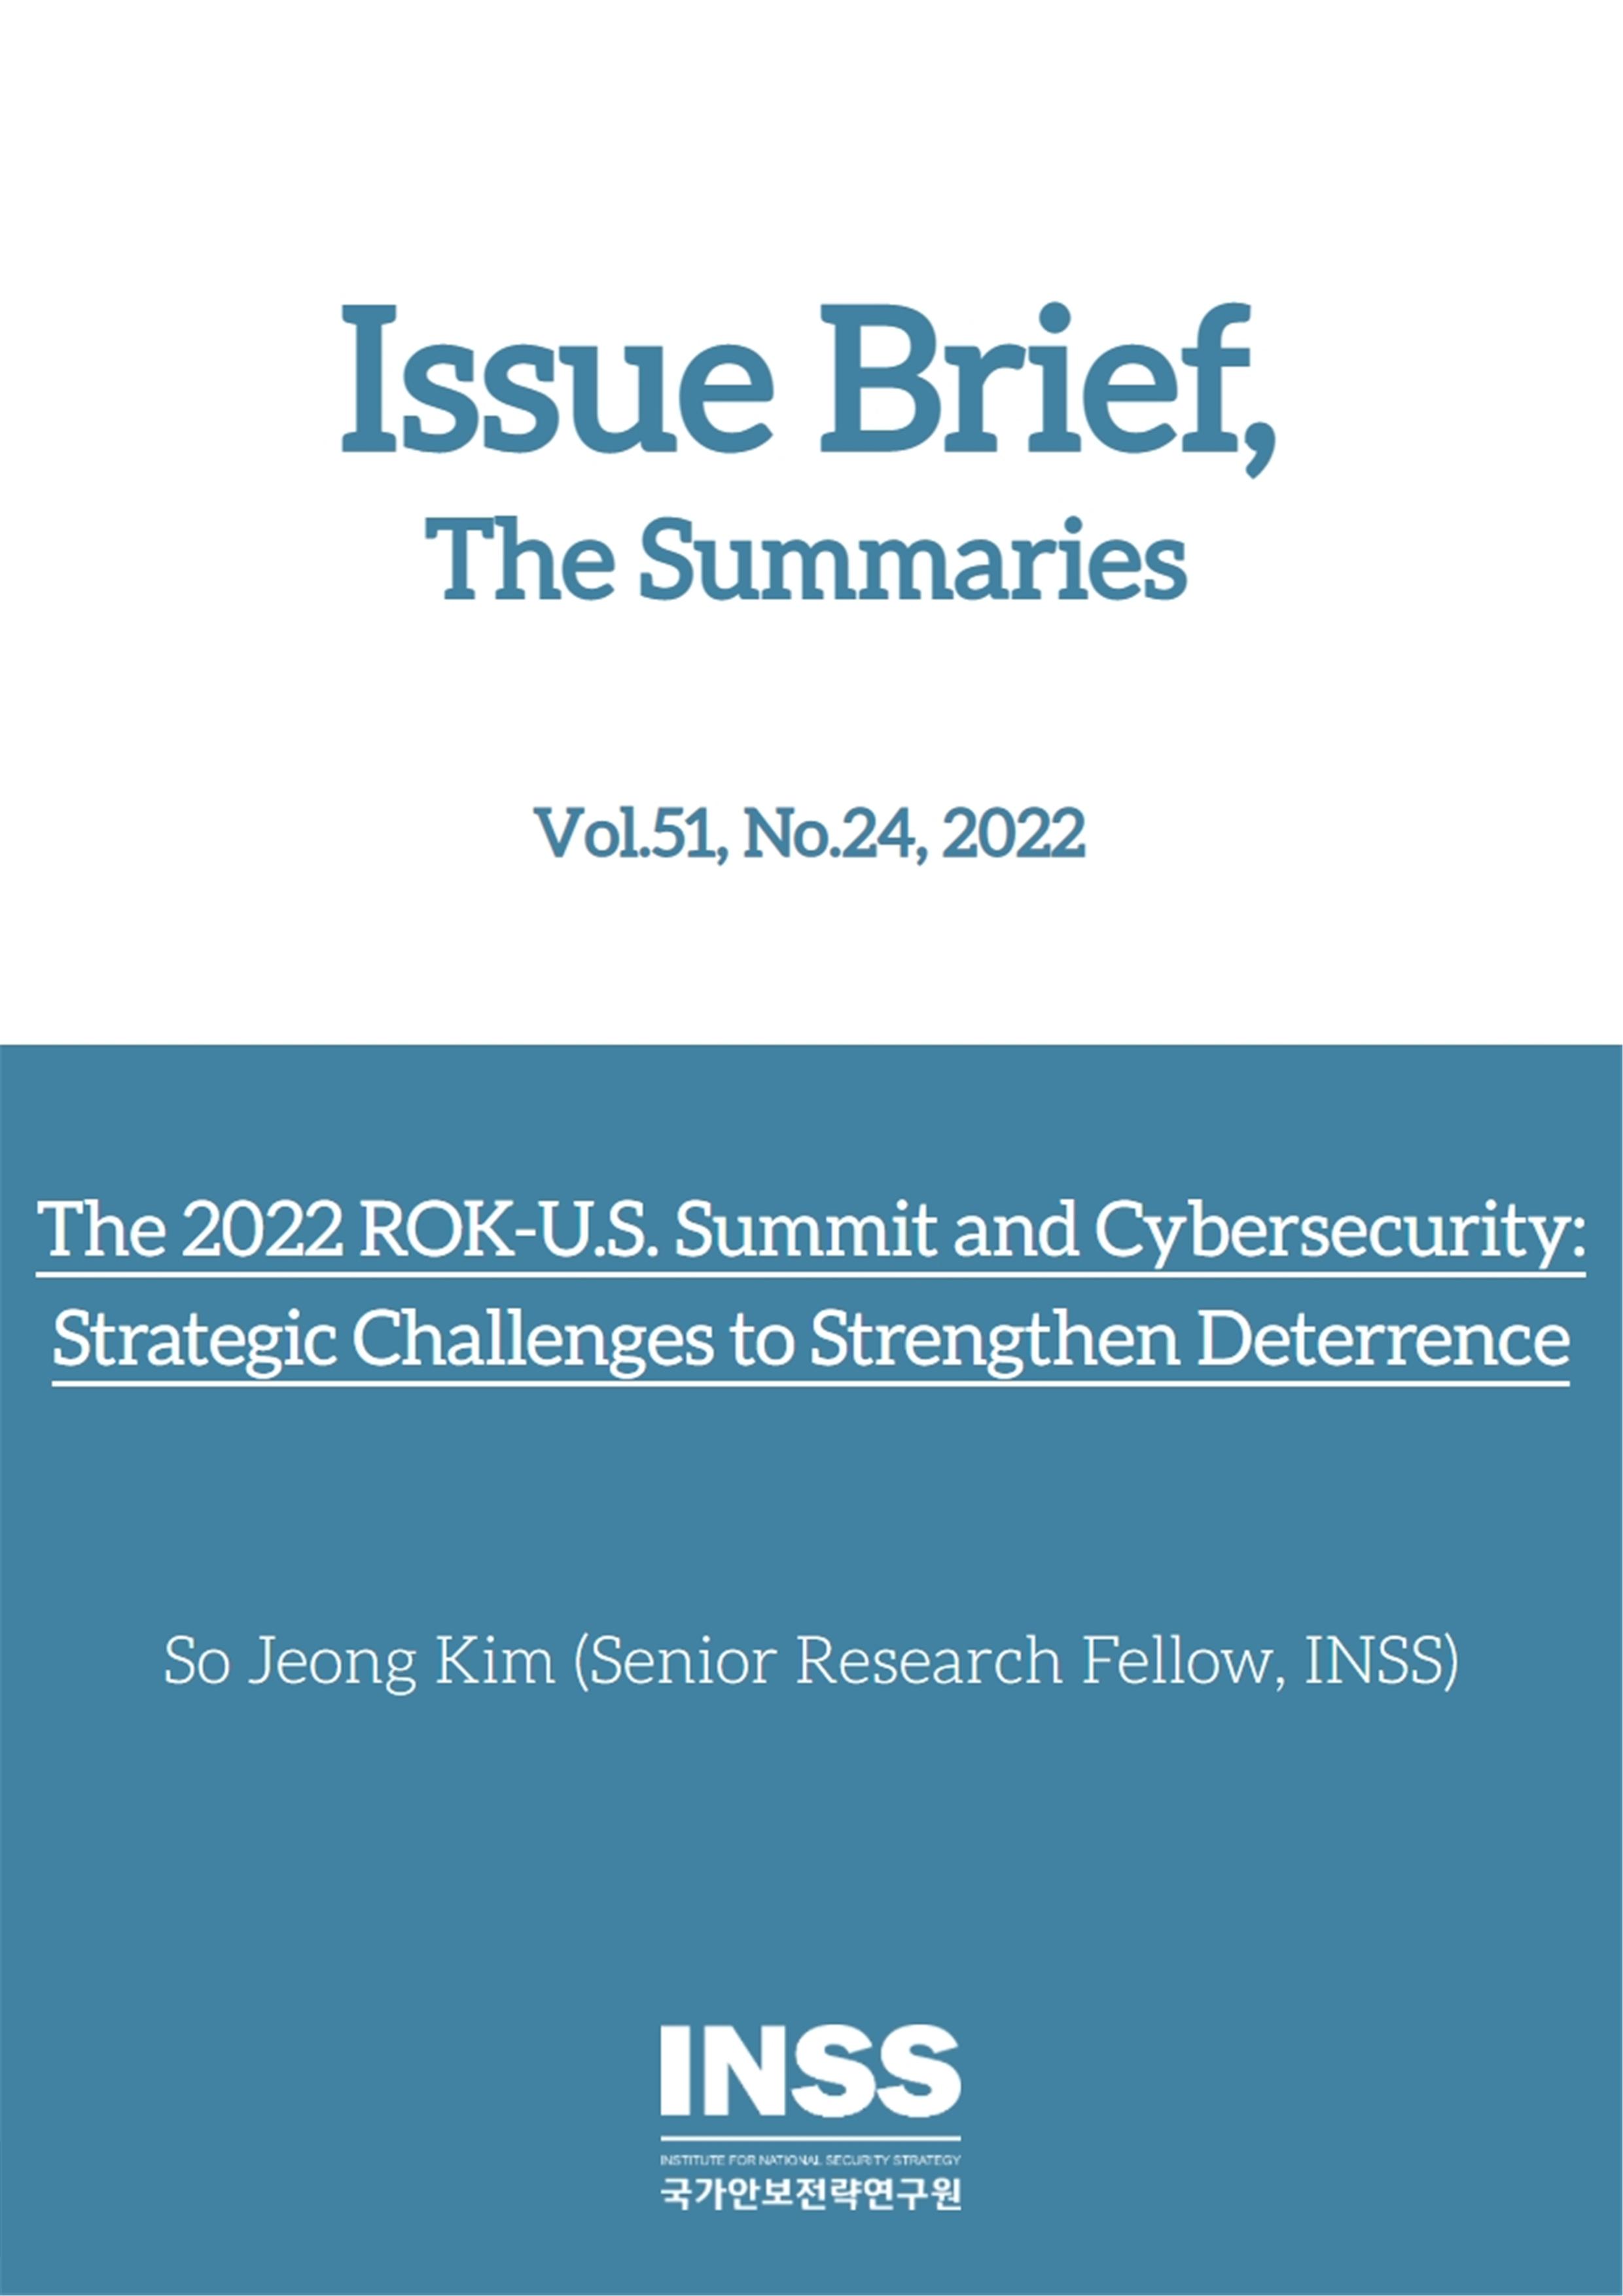 The 2022 ROK-U.S. Summit and Cybersecurity: Strategic Challenges to Strengthen Deterrence